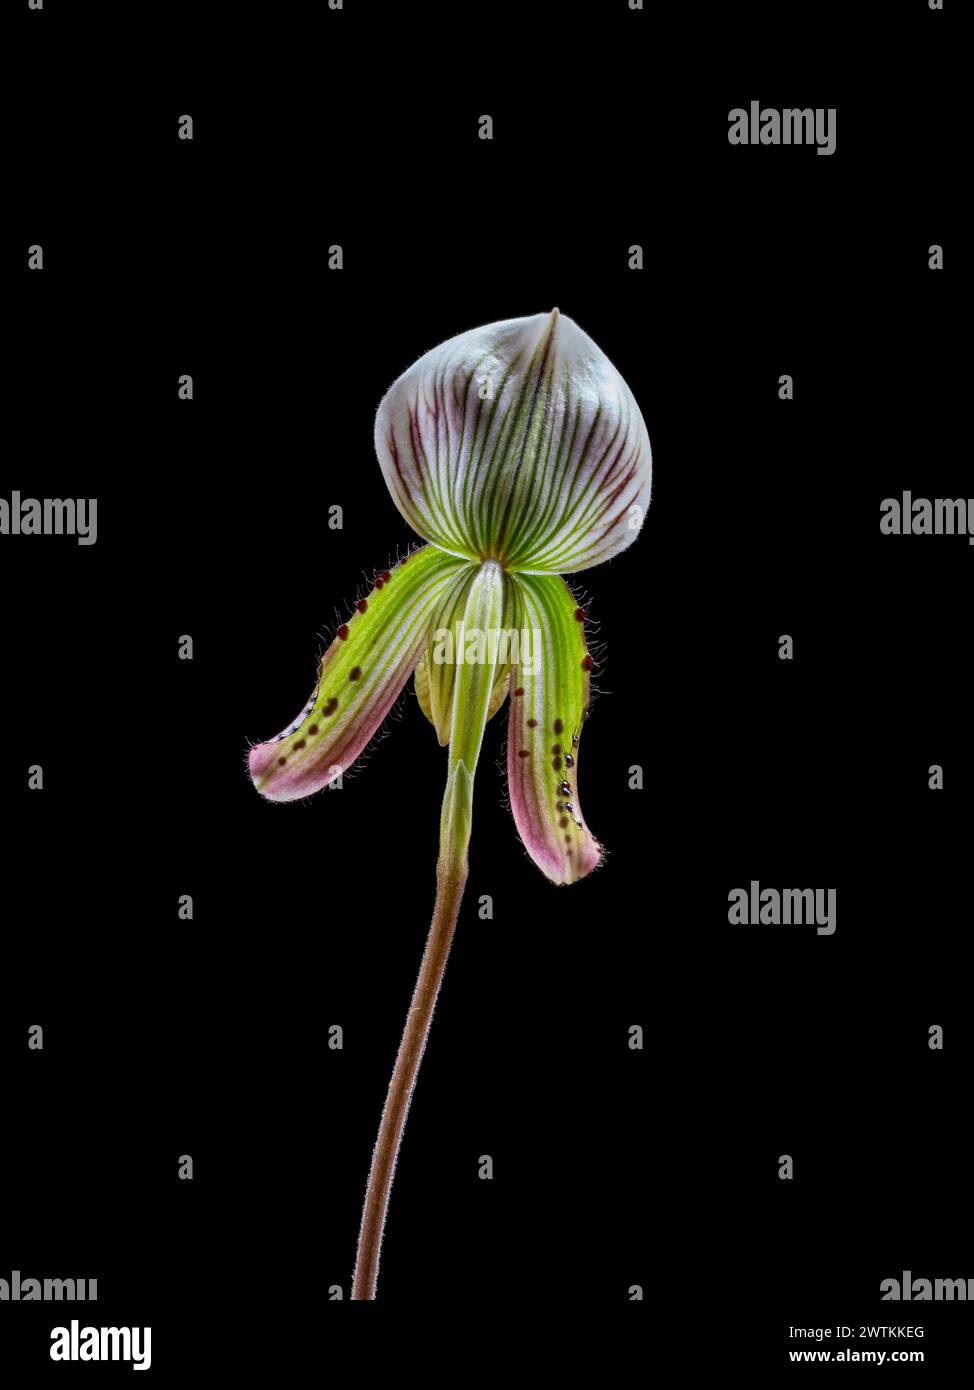 Closeup back view of bright purple green and white flower of lady slipper orchid species paphiopedilum callosum isolated on black background Stock Photo